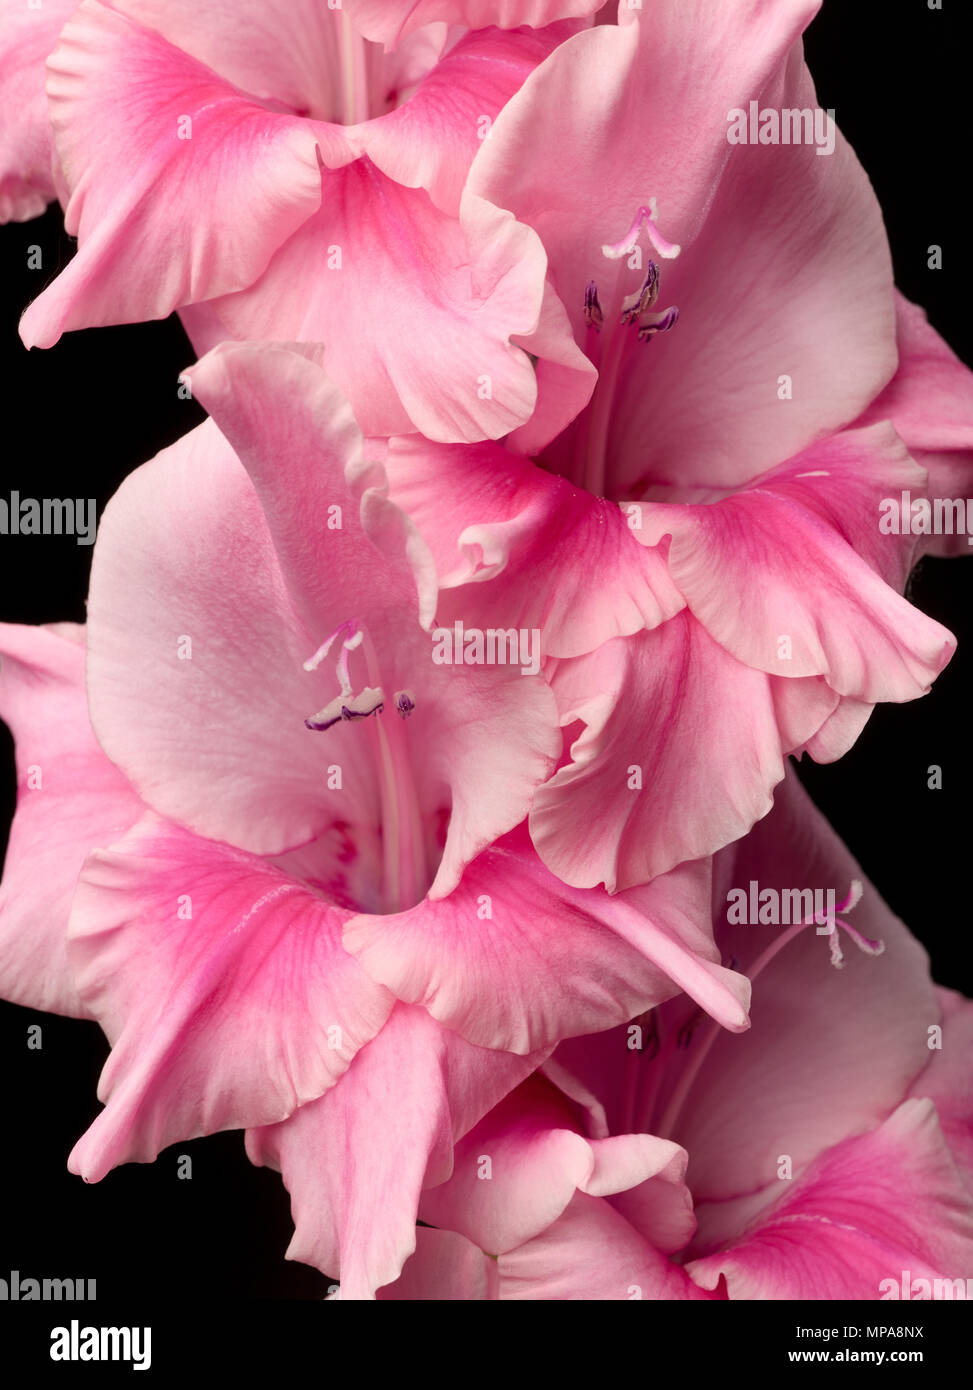 Close-up pink Gladioli flowers in studio setting. Stock Photo